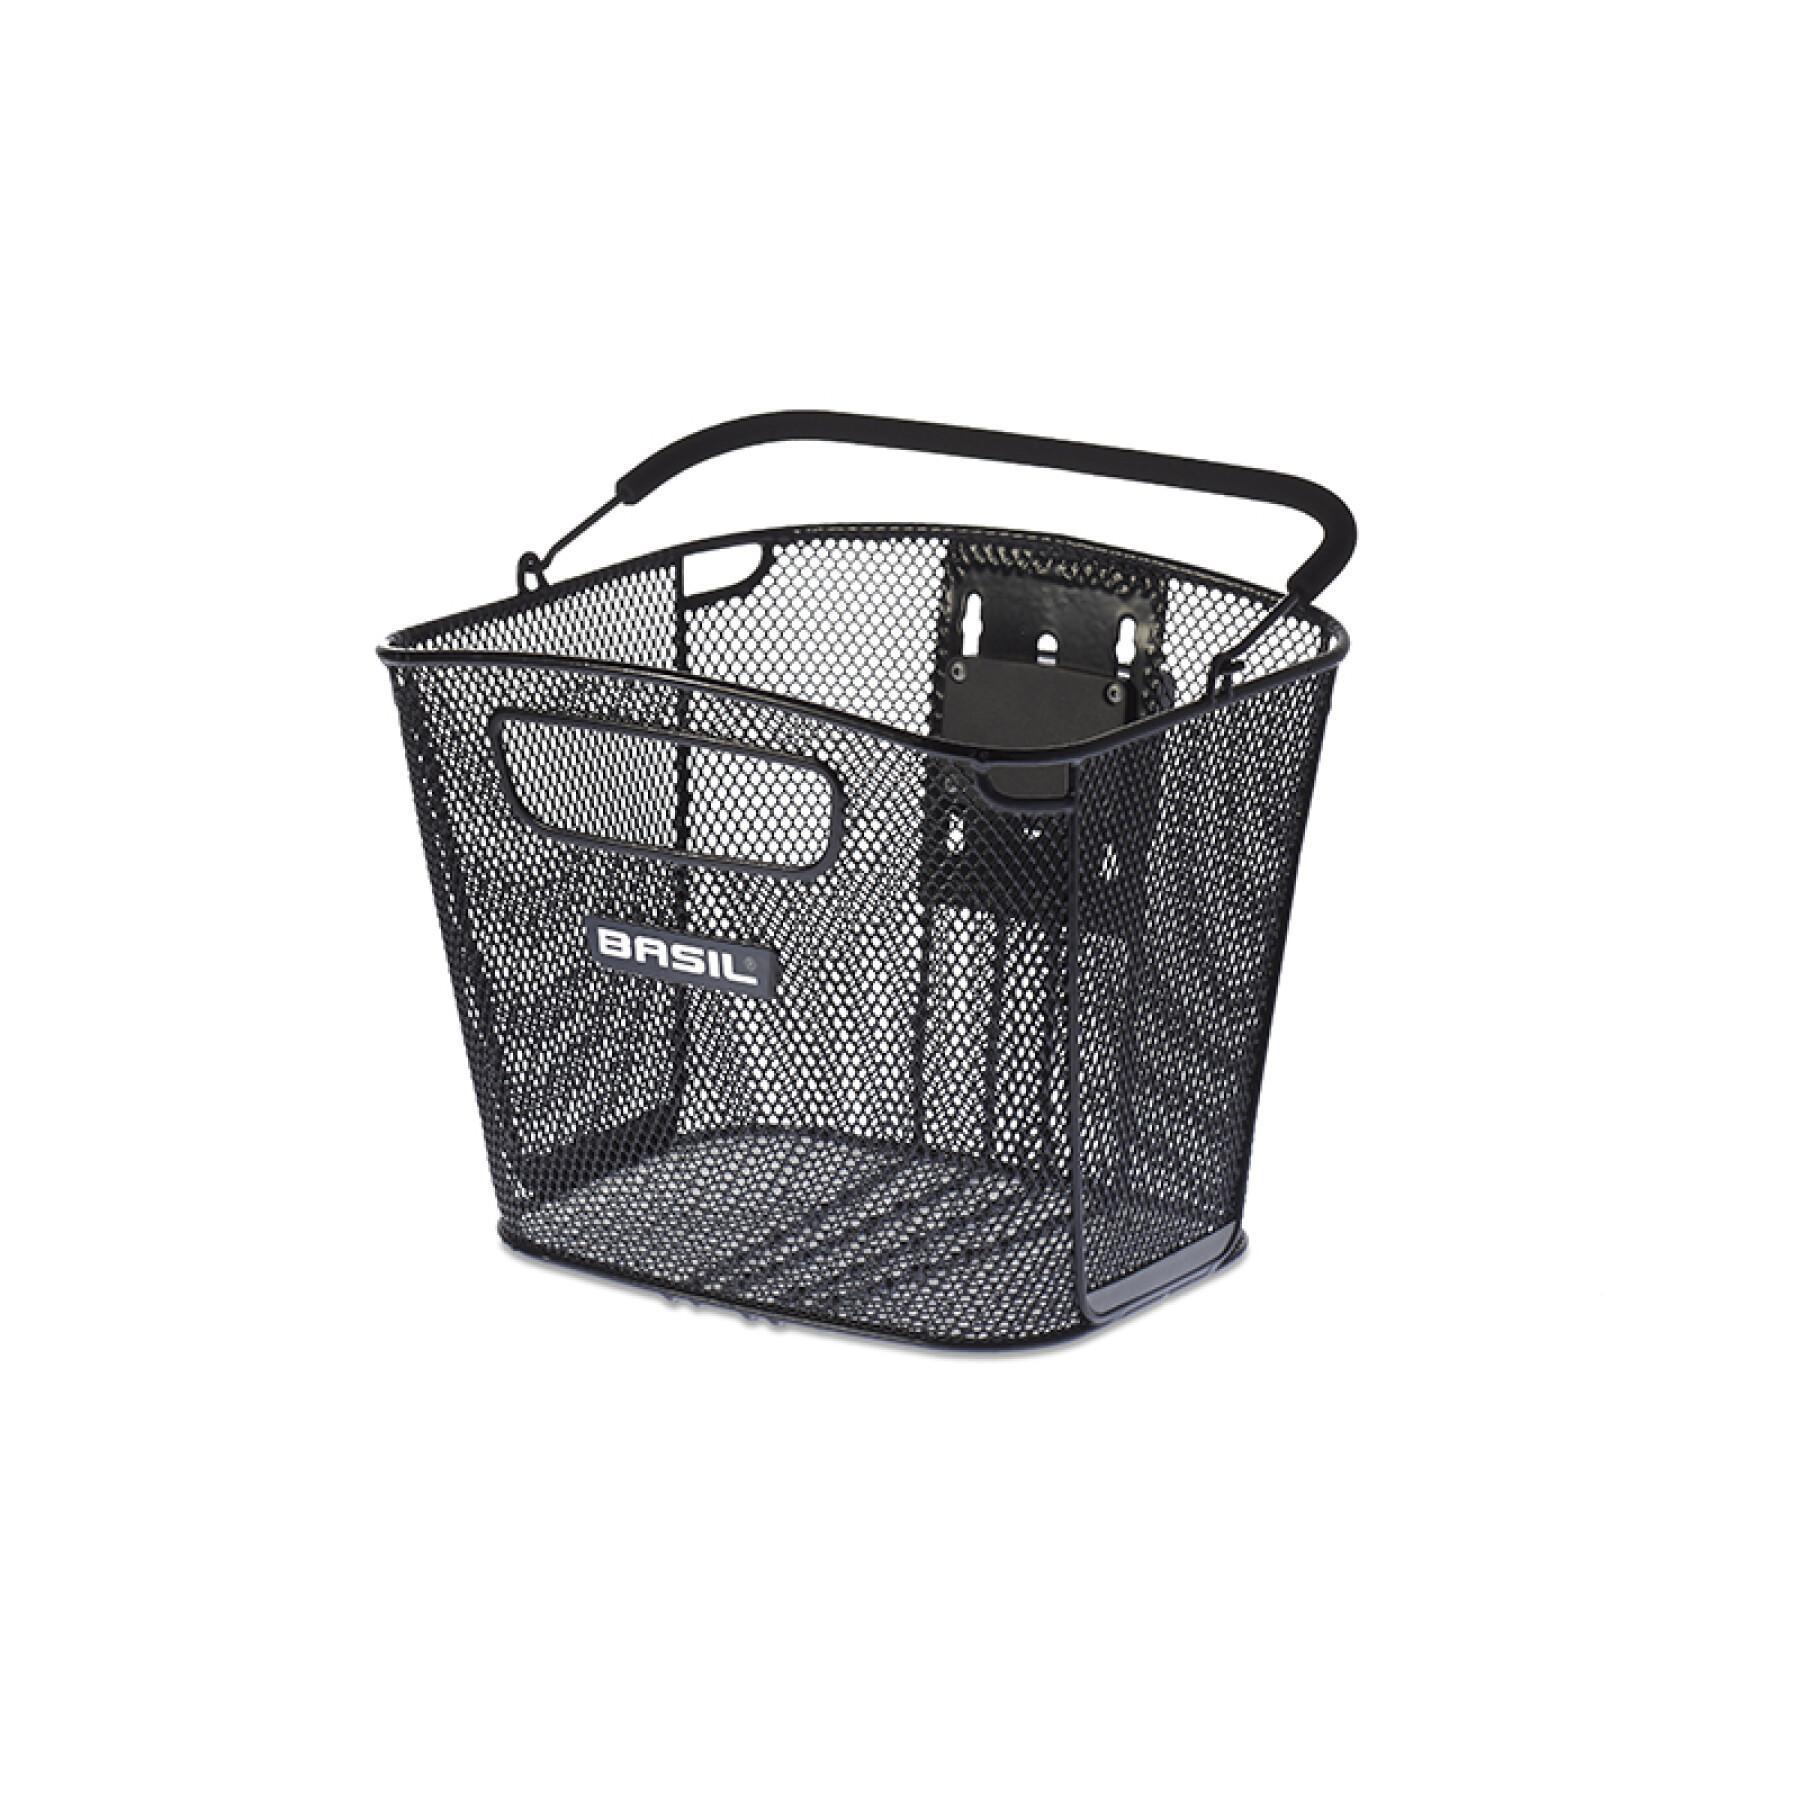 Bicycle basket with handle + adapter kf steel front Basil Bold - Luggage -  Equipments | Fahrradkörbe